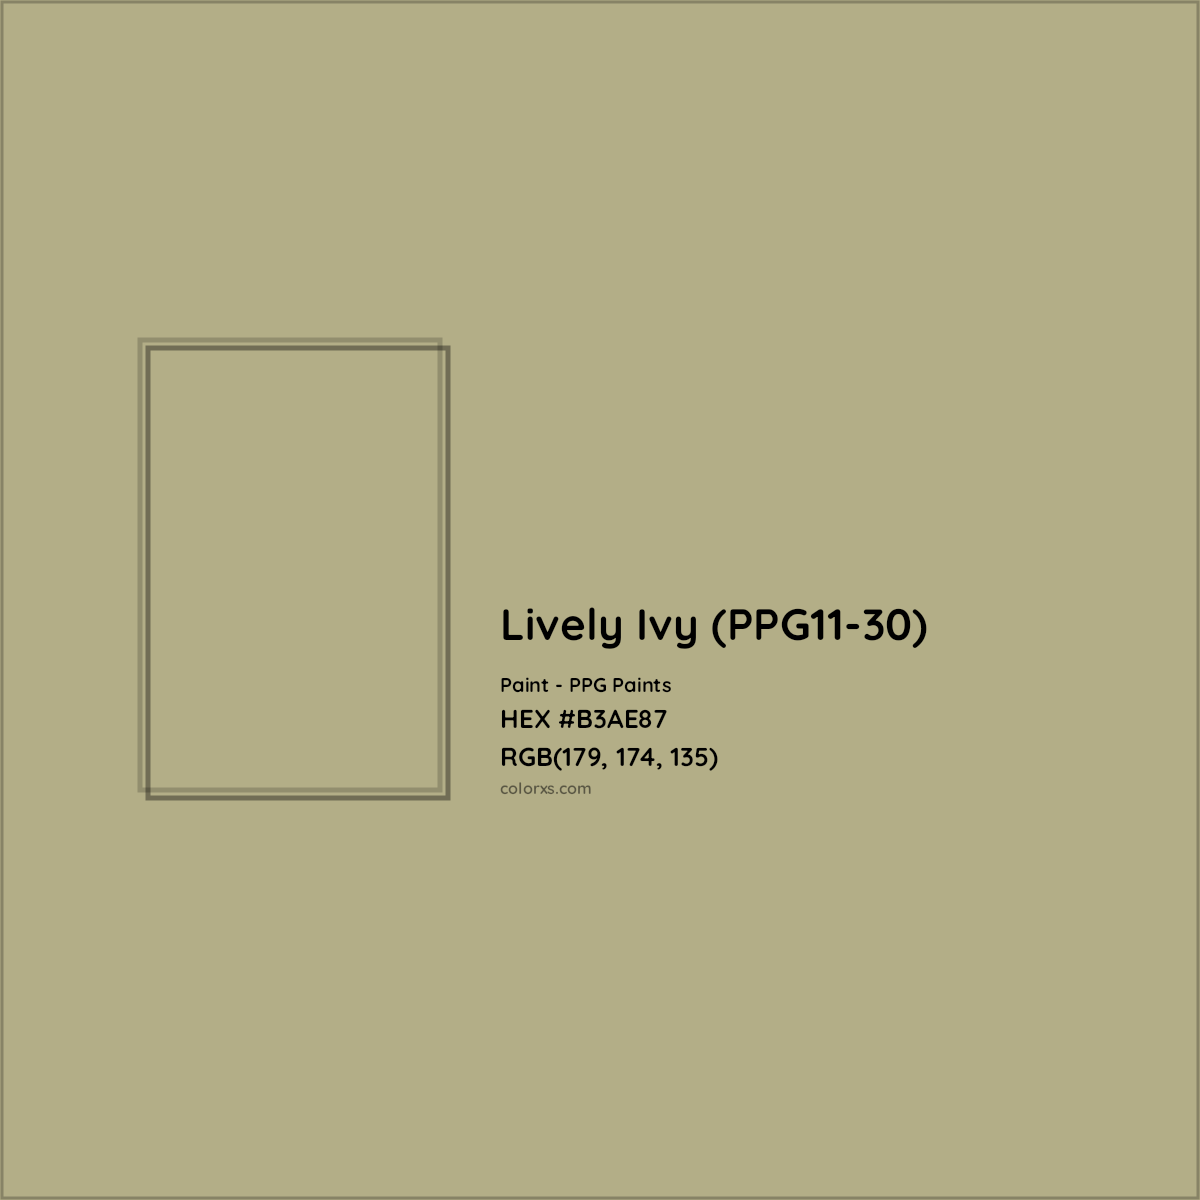 HEX #B3AE87 Lively Ivy (PPG11-30) Paint PPG Paints - Color Code